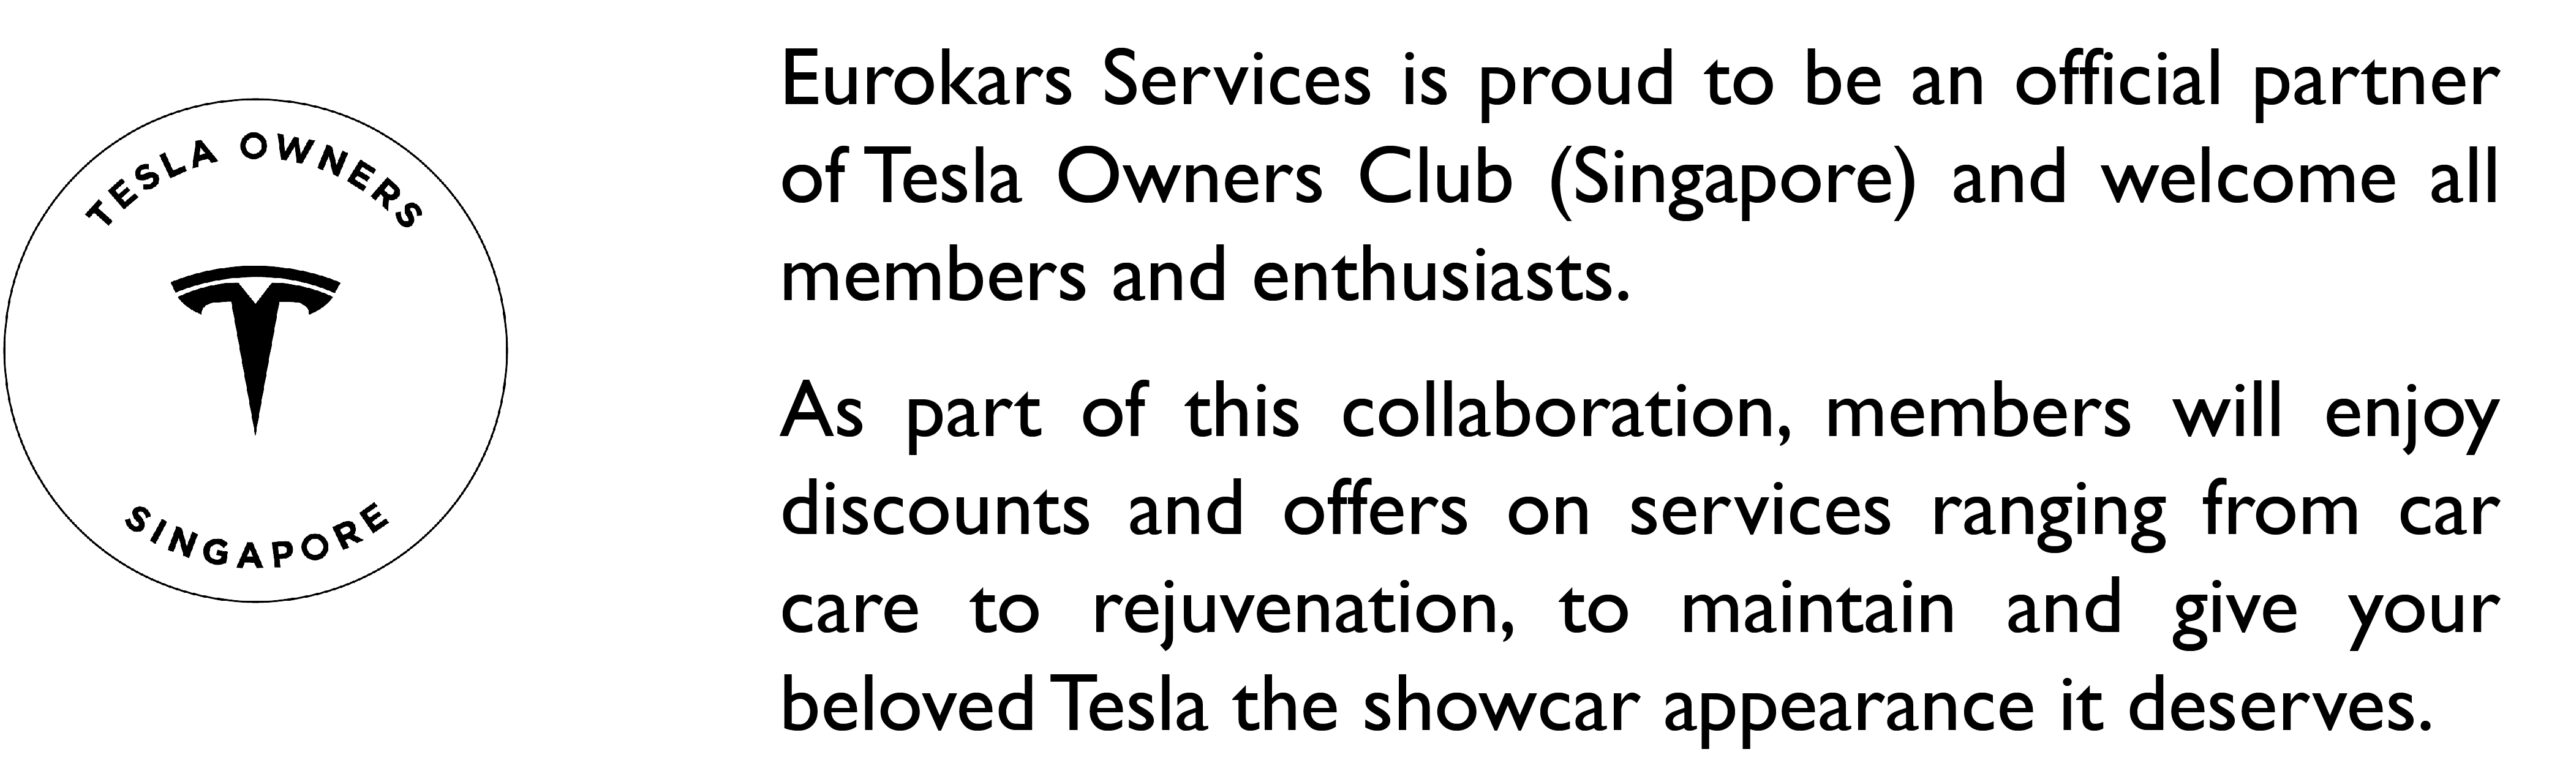 Eurokars Services is proud to be an official partner of Tesla Owners Club (Singapore) and welcome all members and enthusiasts. As part of this collaboration, members will enjoy discounts and offers on services ranging from car care to rejuvenation, to maintain and give your beloved Tesla the showcar appearance it deserves.